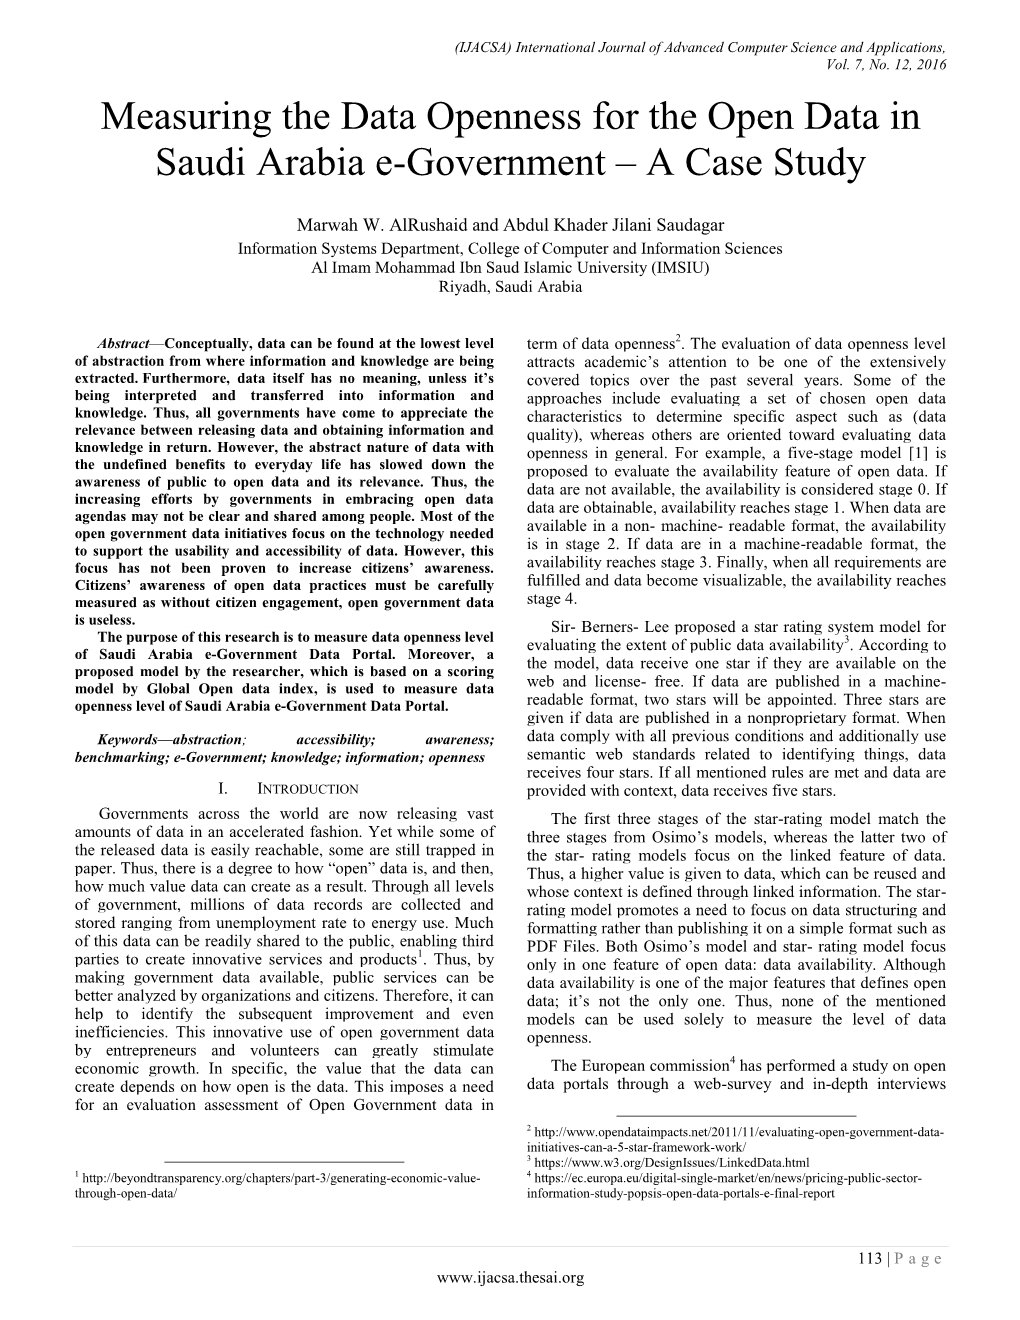 Measuring the Data Openness for the Open Data in Saudi Arabia E-Government – a Case Study